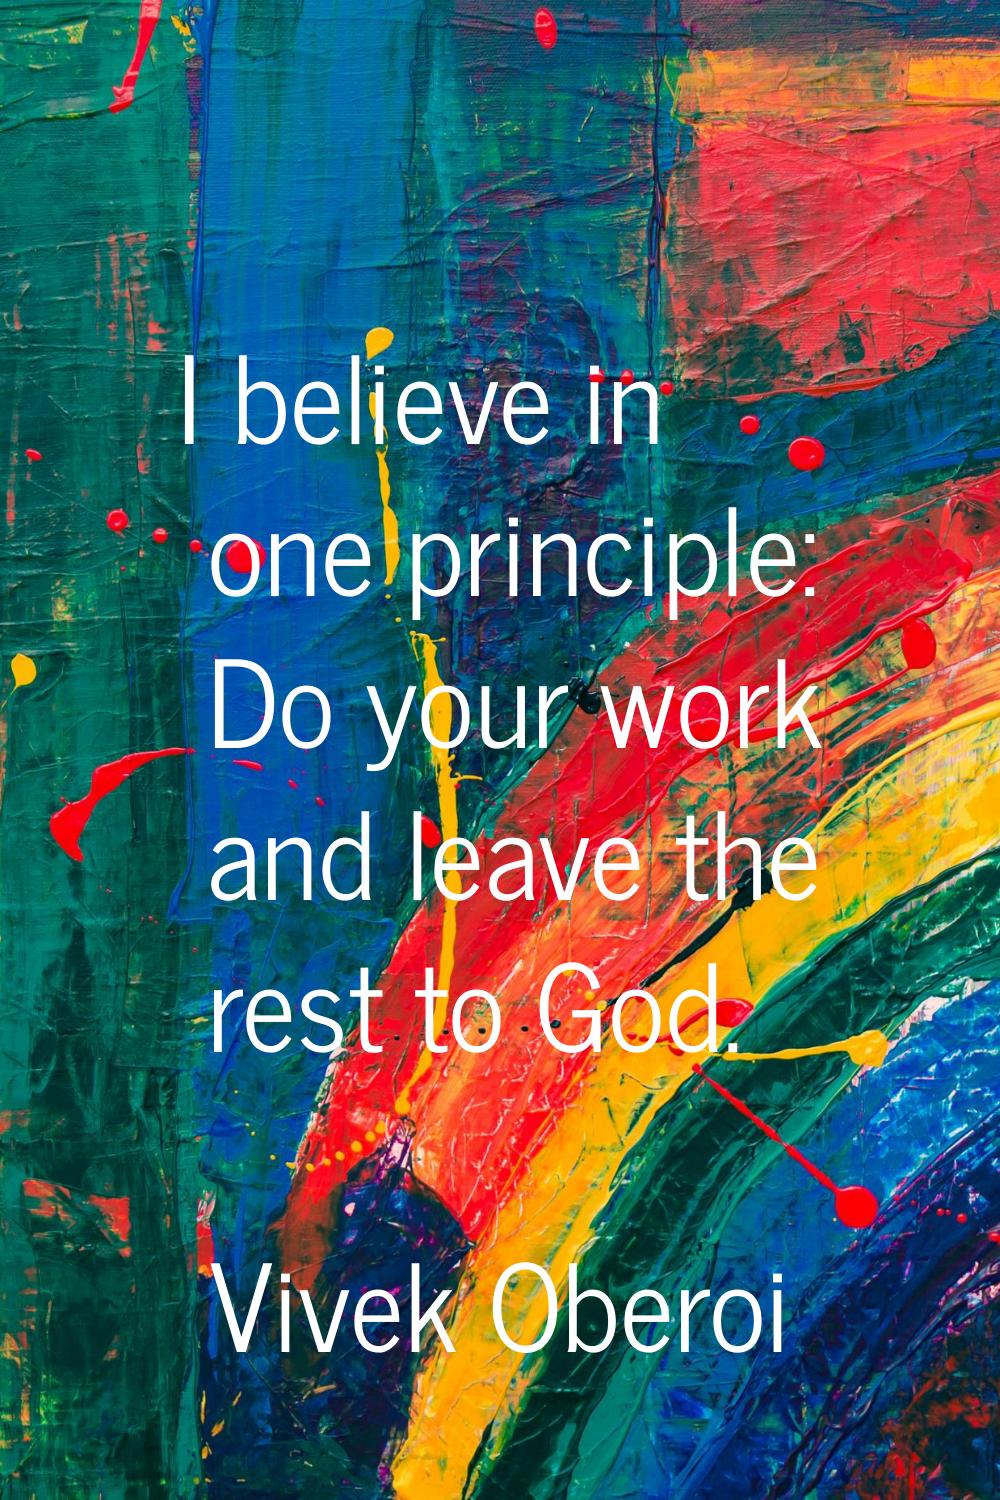 I believe in one principle: Do your work and leave the rest to God.